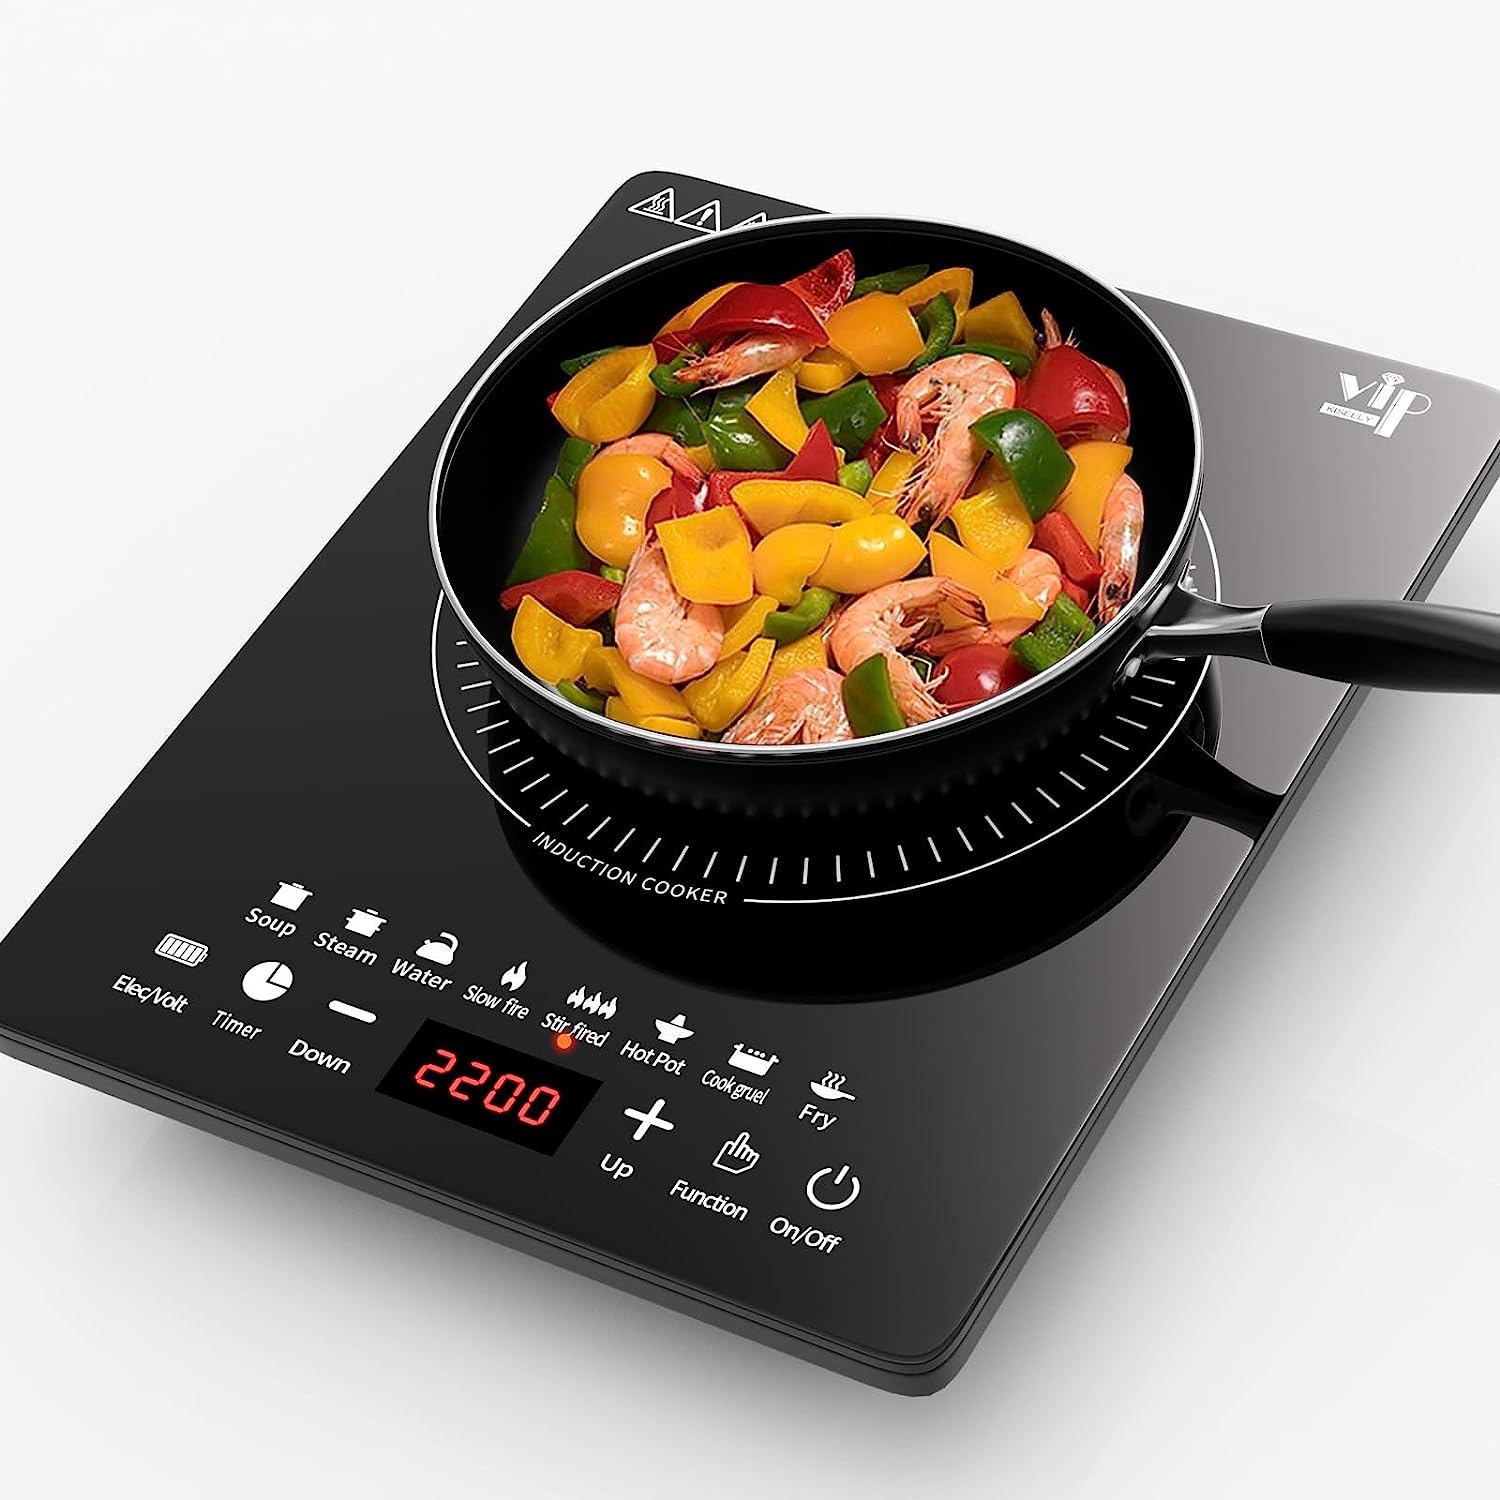 Portable Induction Cooktop, Countertop Burner with [...]